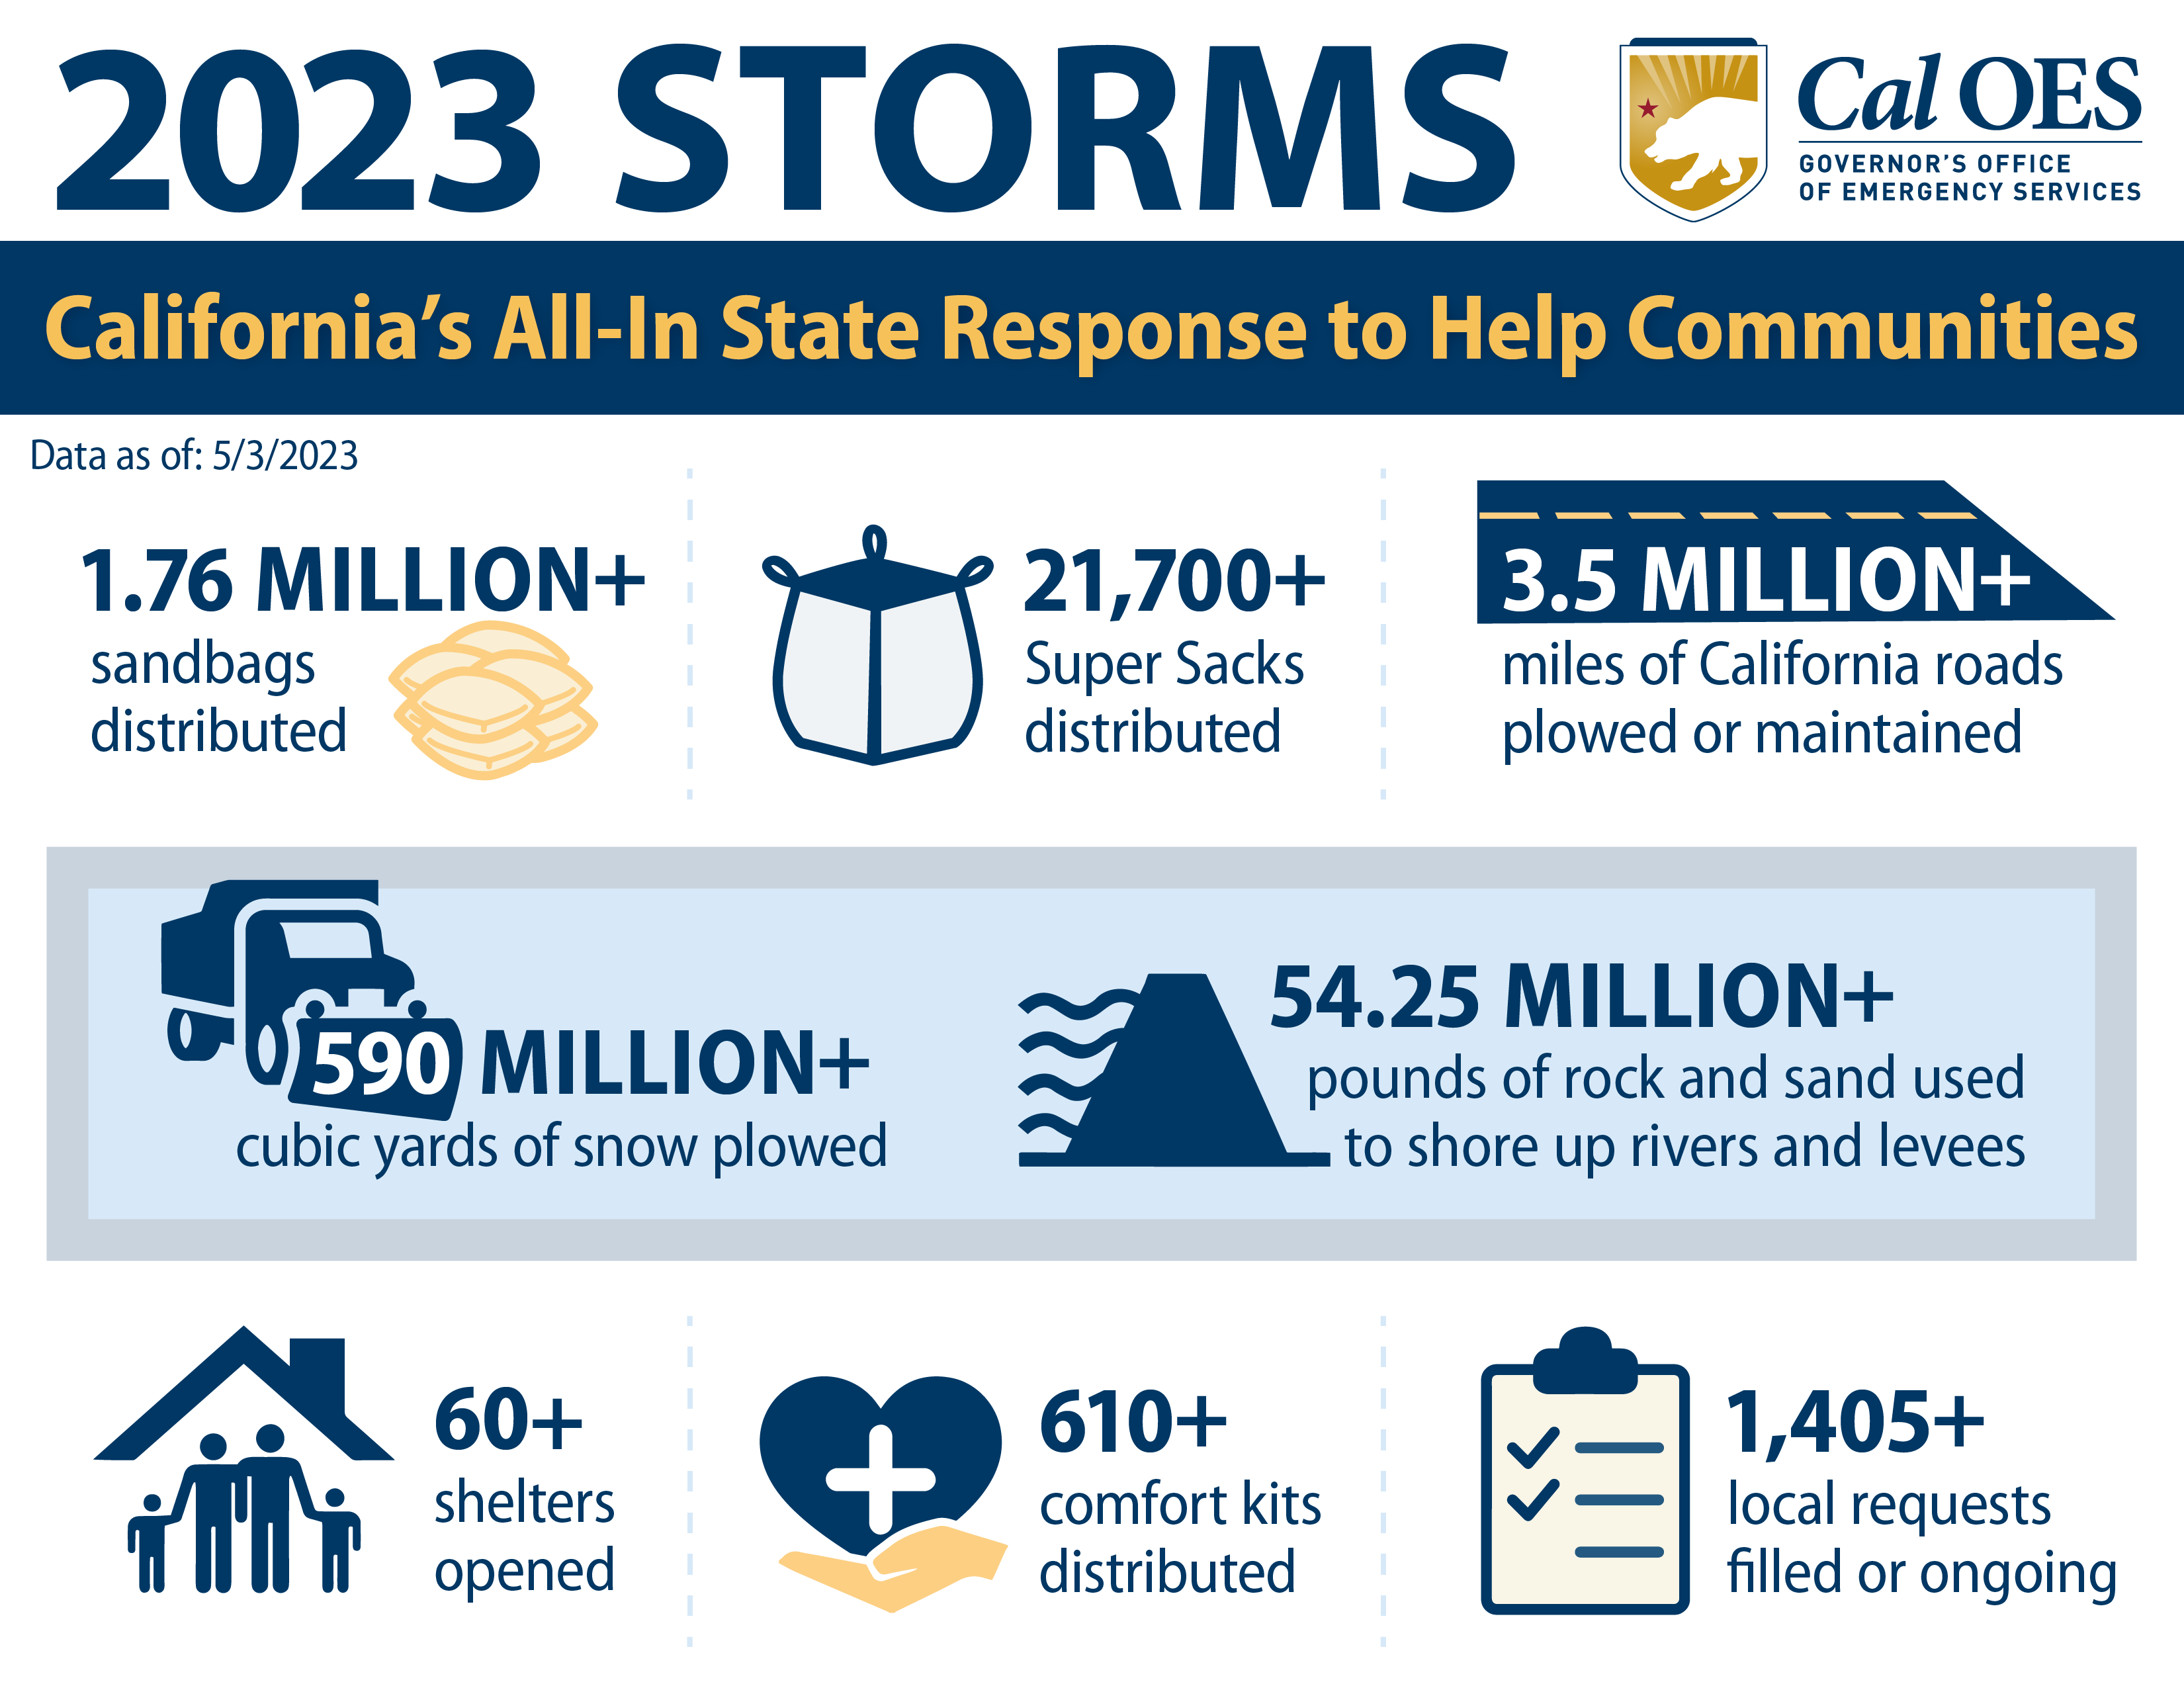 2023 STORMS California's All-In State Response to Help Communities Data as of: 5/3/2023 1.76 MILLION+ sandbags distributed 0590 MILLION+ cubic yards of snow plowed 60+ Shelters opened 21,700+ Super Sacks distributed 610+ comfort kits distributed Cal OES GOVERNOR'S OFFICE OF EMERGENCY SERVICES 3.5 MILLION+ miles of California roads plowed or maintained 54.25 MILLION+ pounds of rock and sand used to shore up rivers and levees 1,405+ local requests filled or ongoing